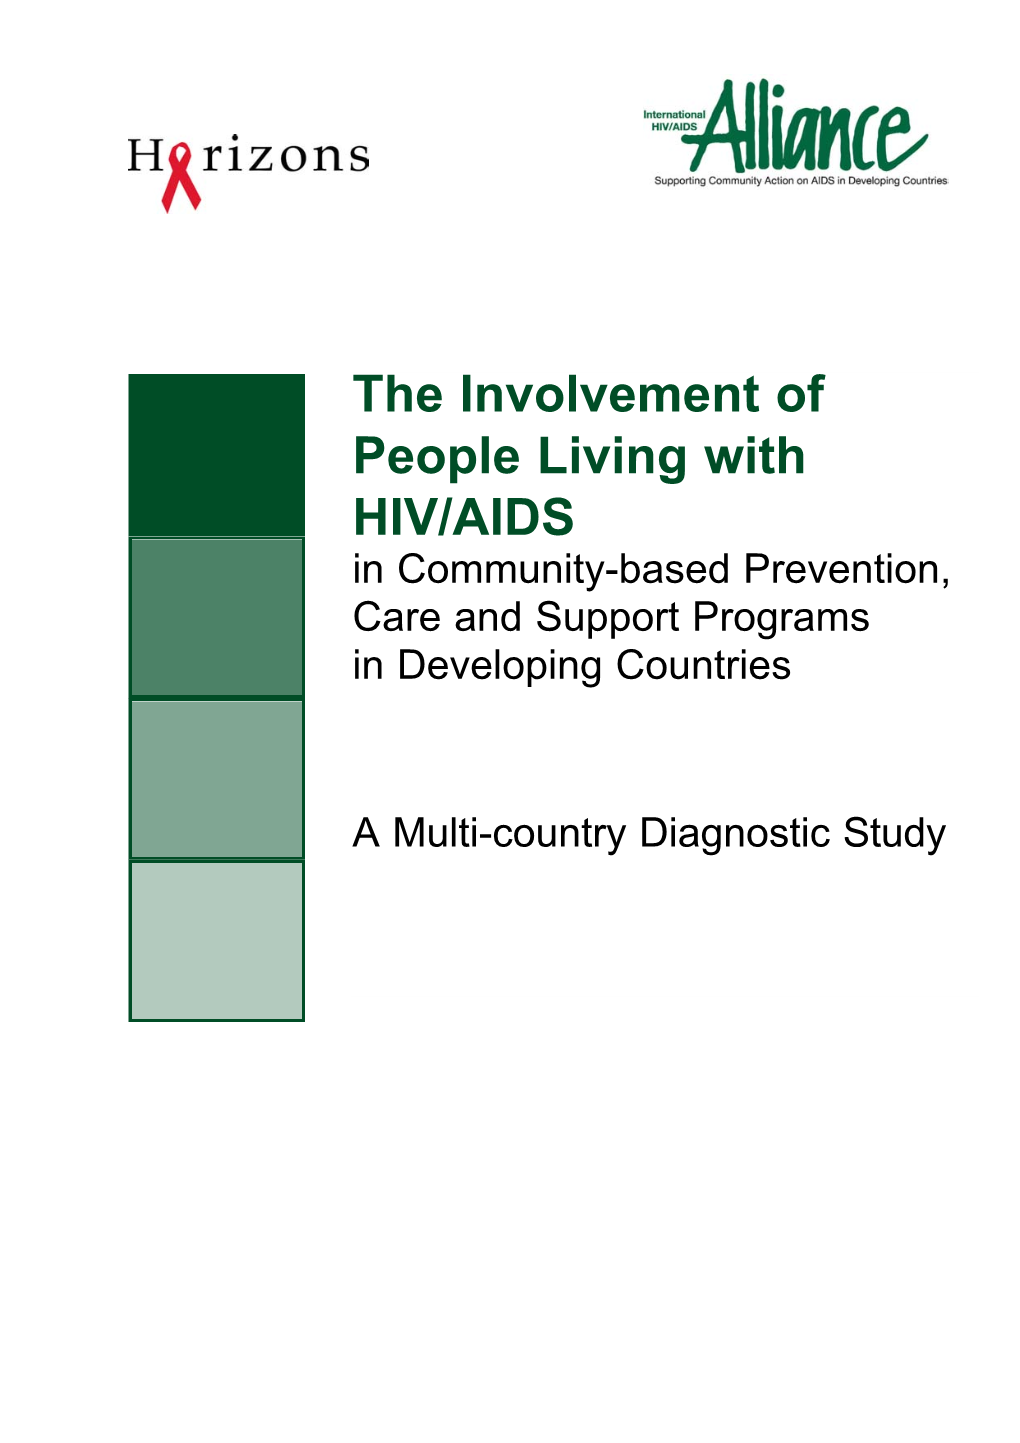 The Involvement of People Living with HIV/AIDS in Community-Based Prevention, Care and Support Programs in Developing Countries